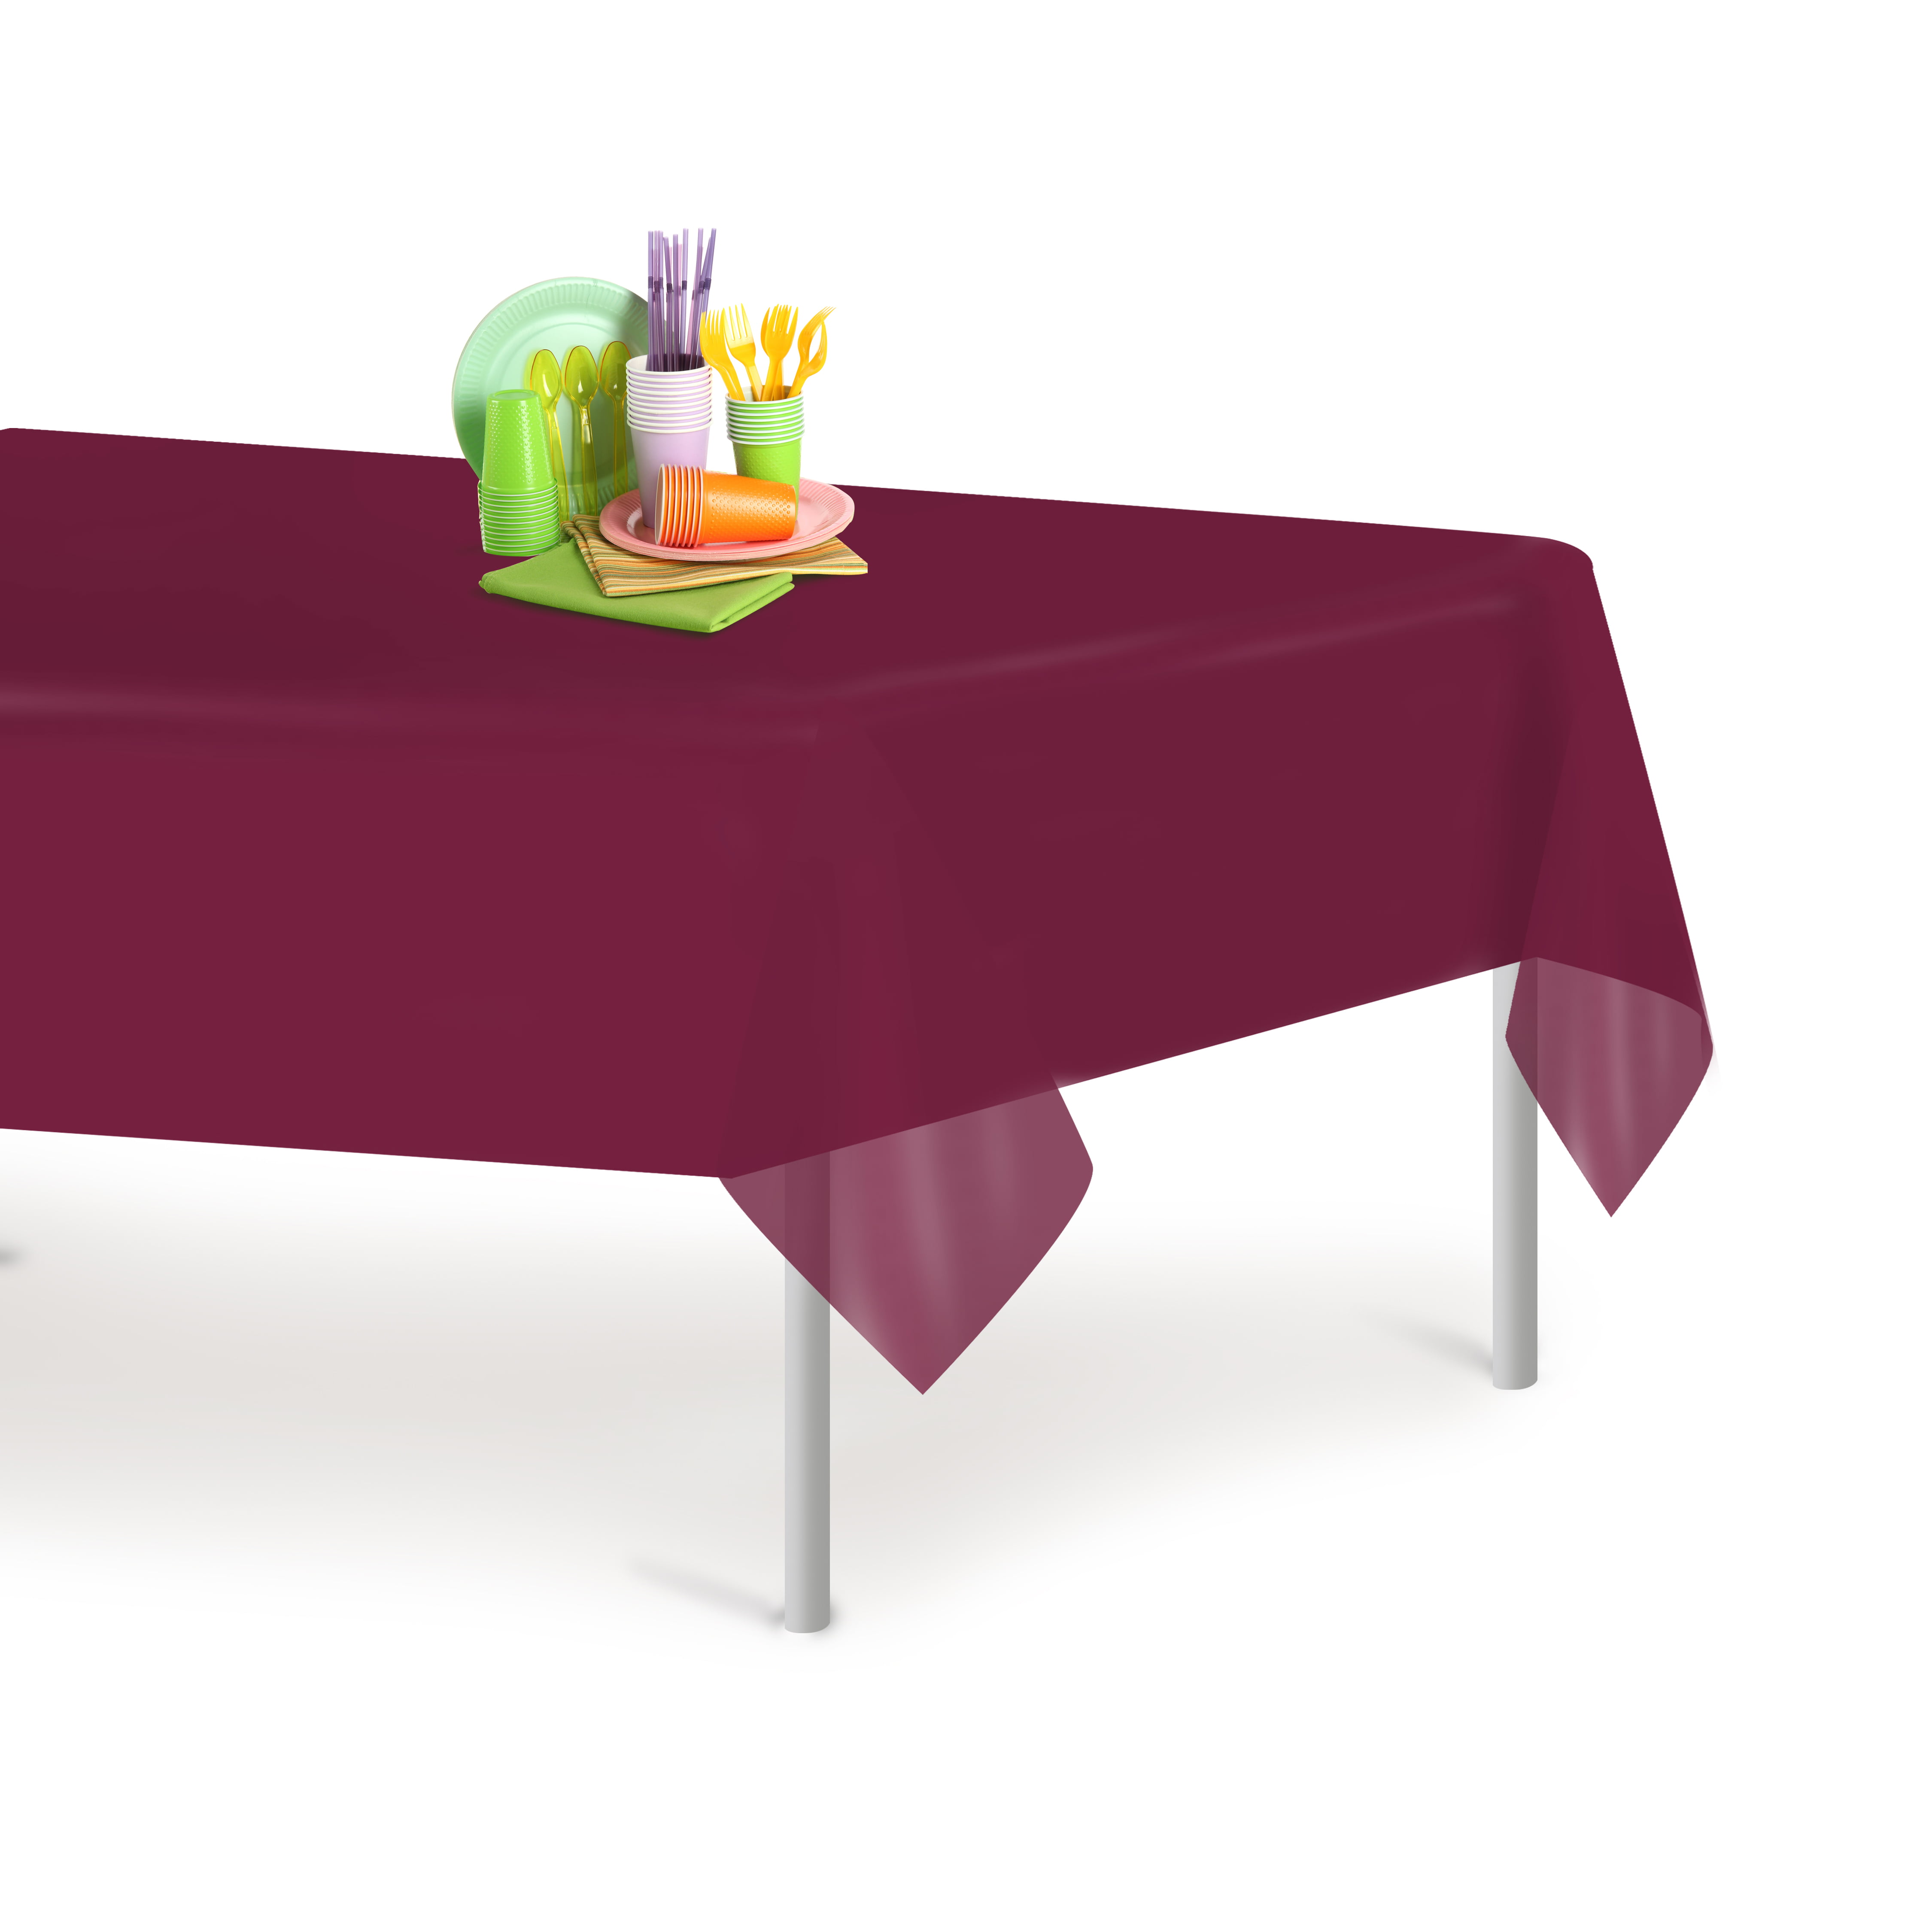 Details about   1 Piece Home and Garden Suppliy Table Cloth Colorful Table Cover Party Supply 